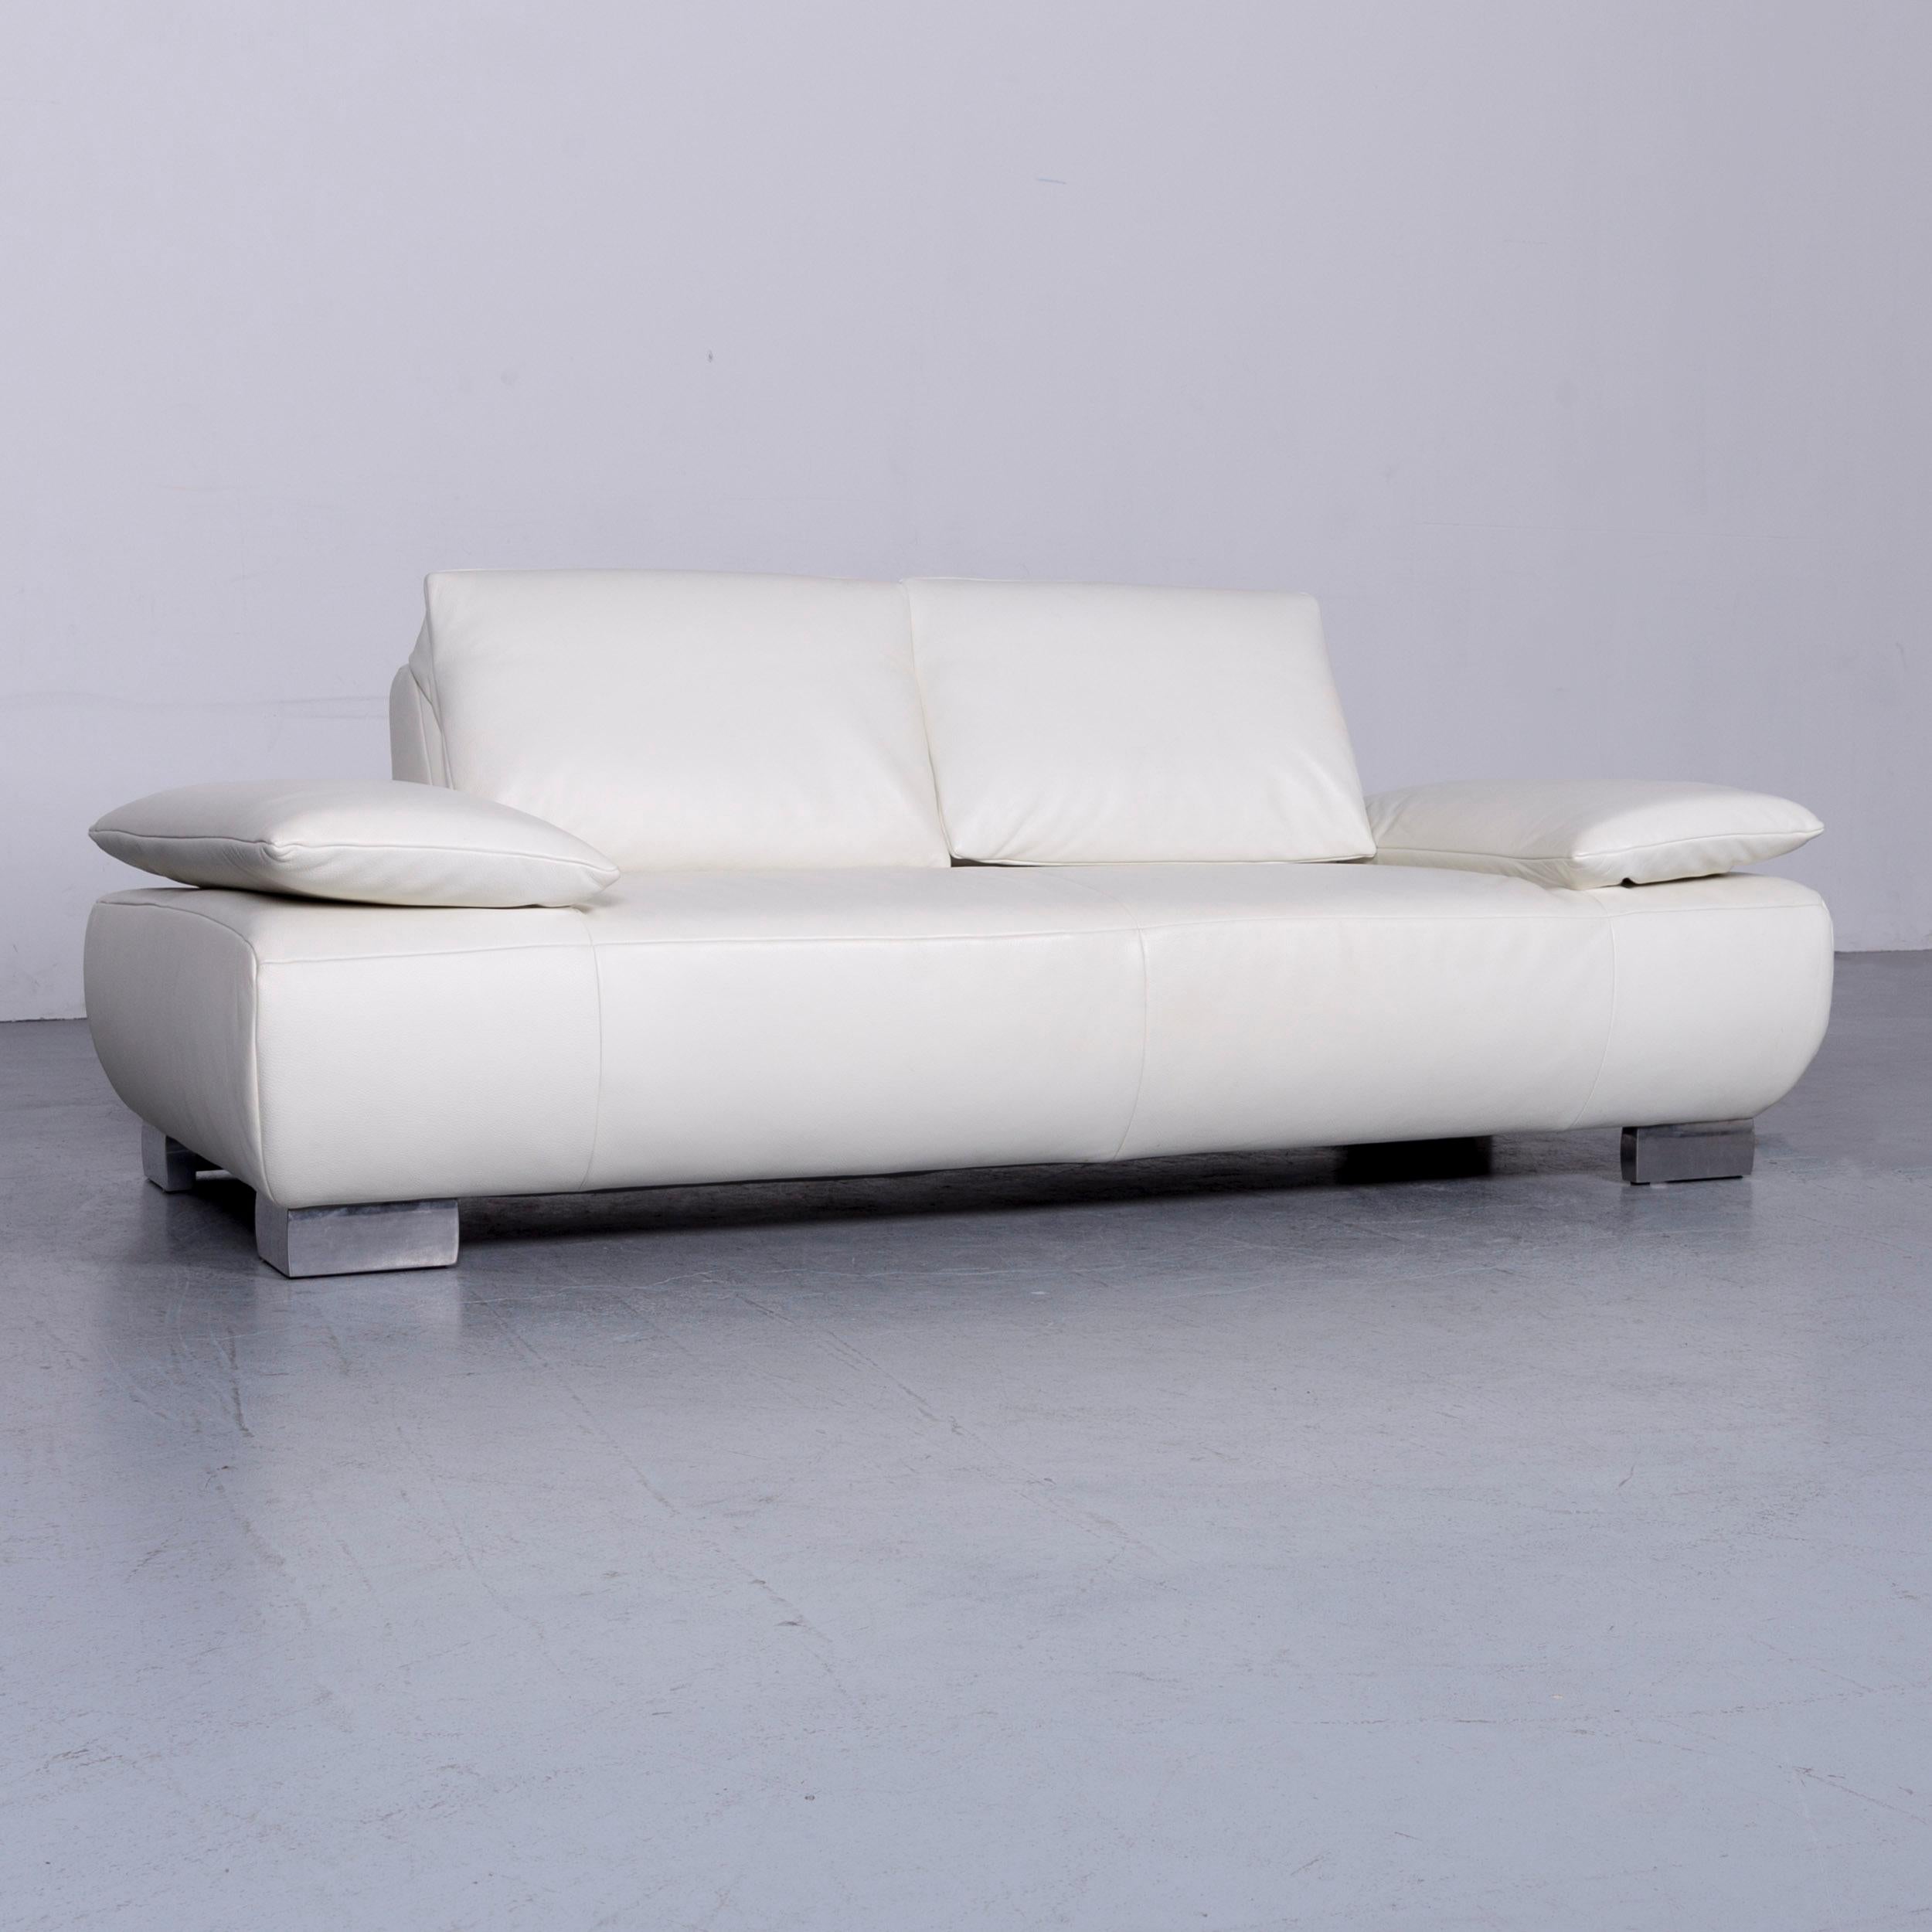 Koinor Volare Designer Sofa White Three-Seat Leather Couch with Function In Good Condition For Sale In Cologne, DE